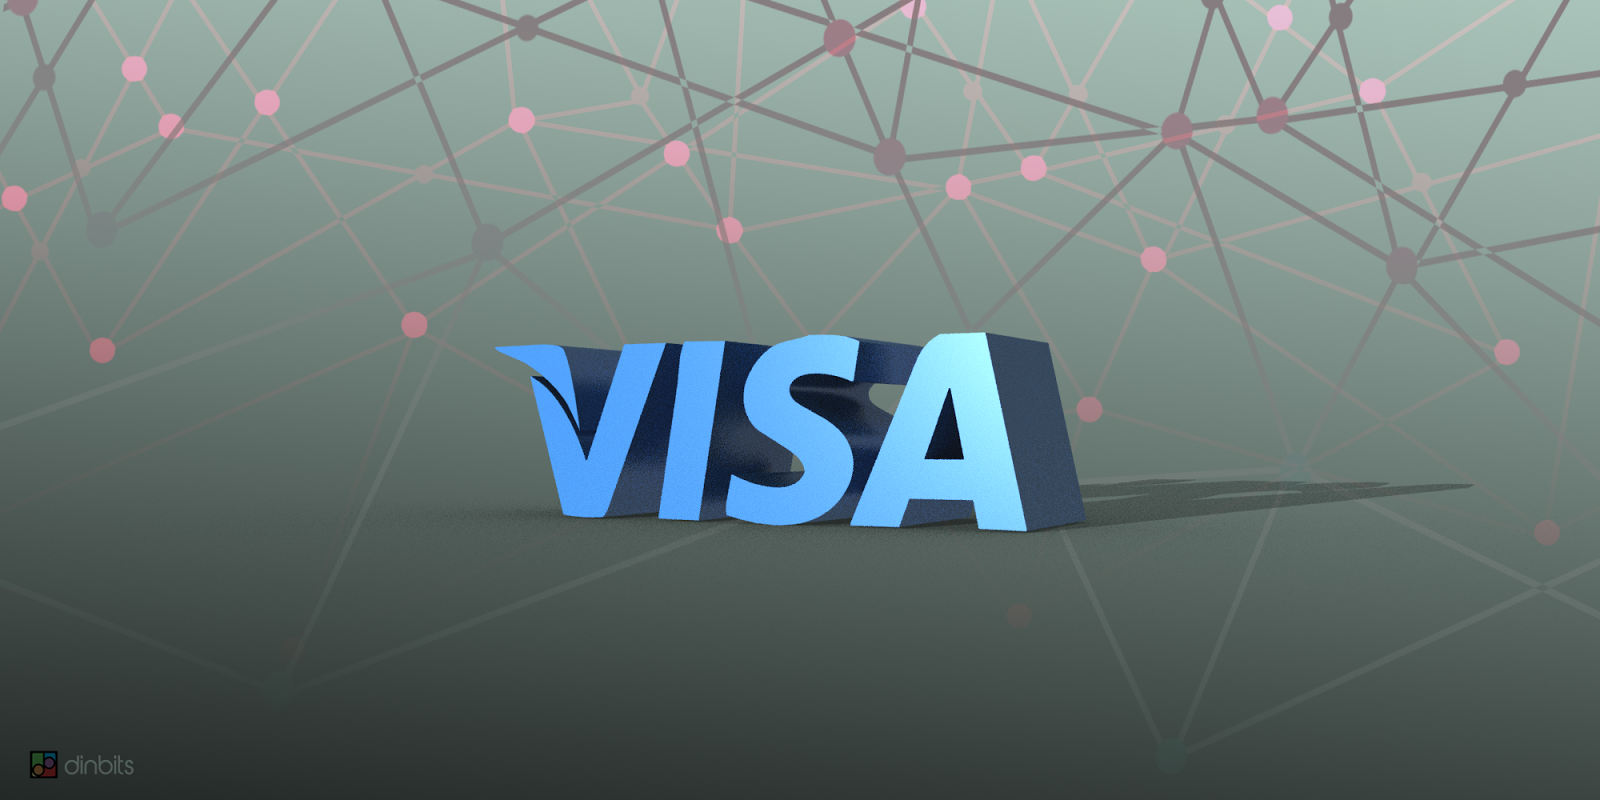 Former Visa chief takes the helm at crypto banking startup